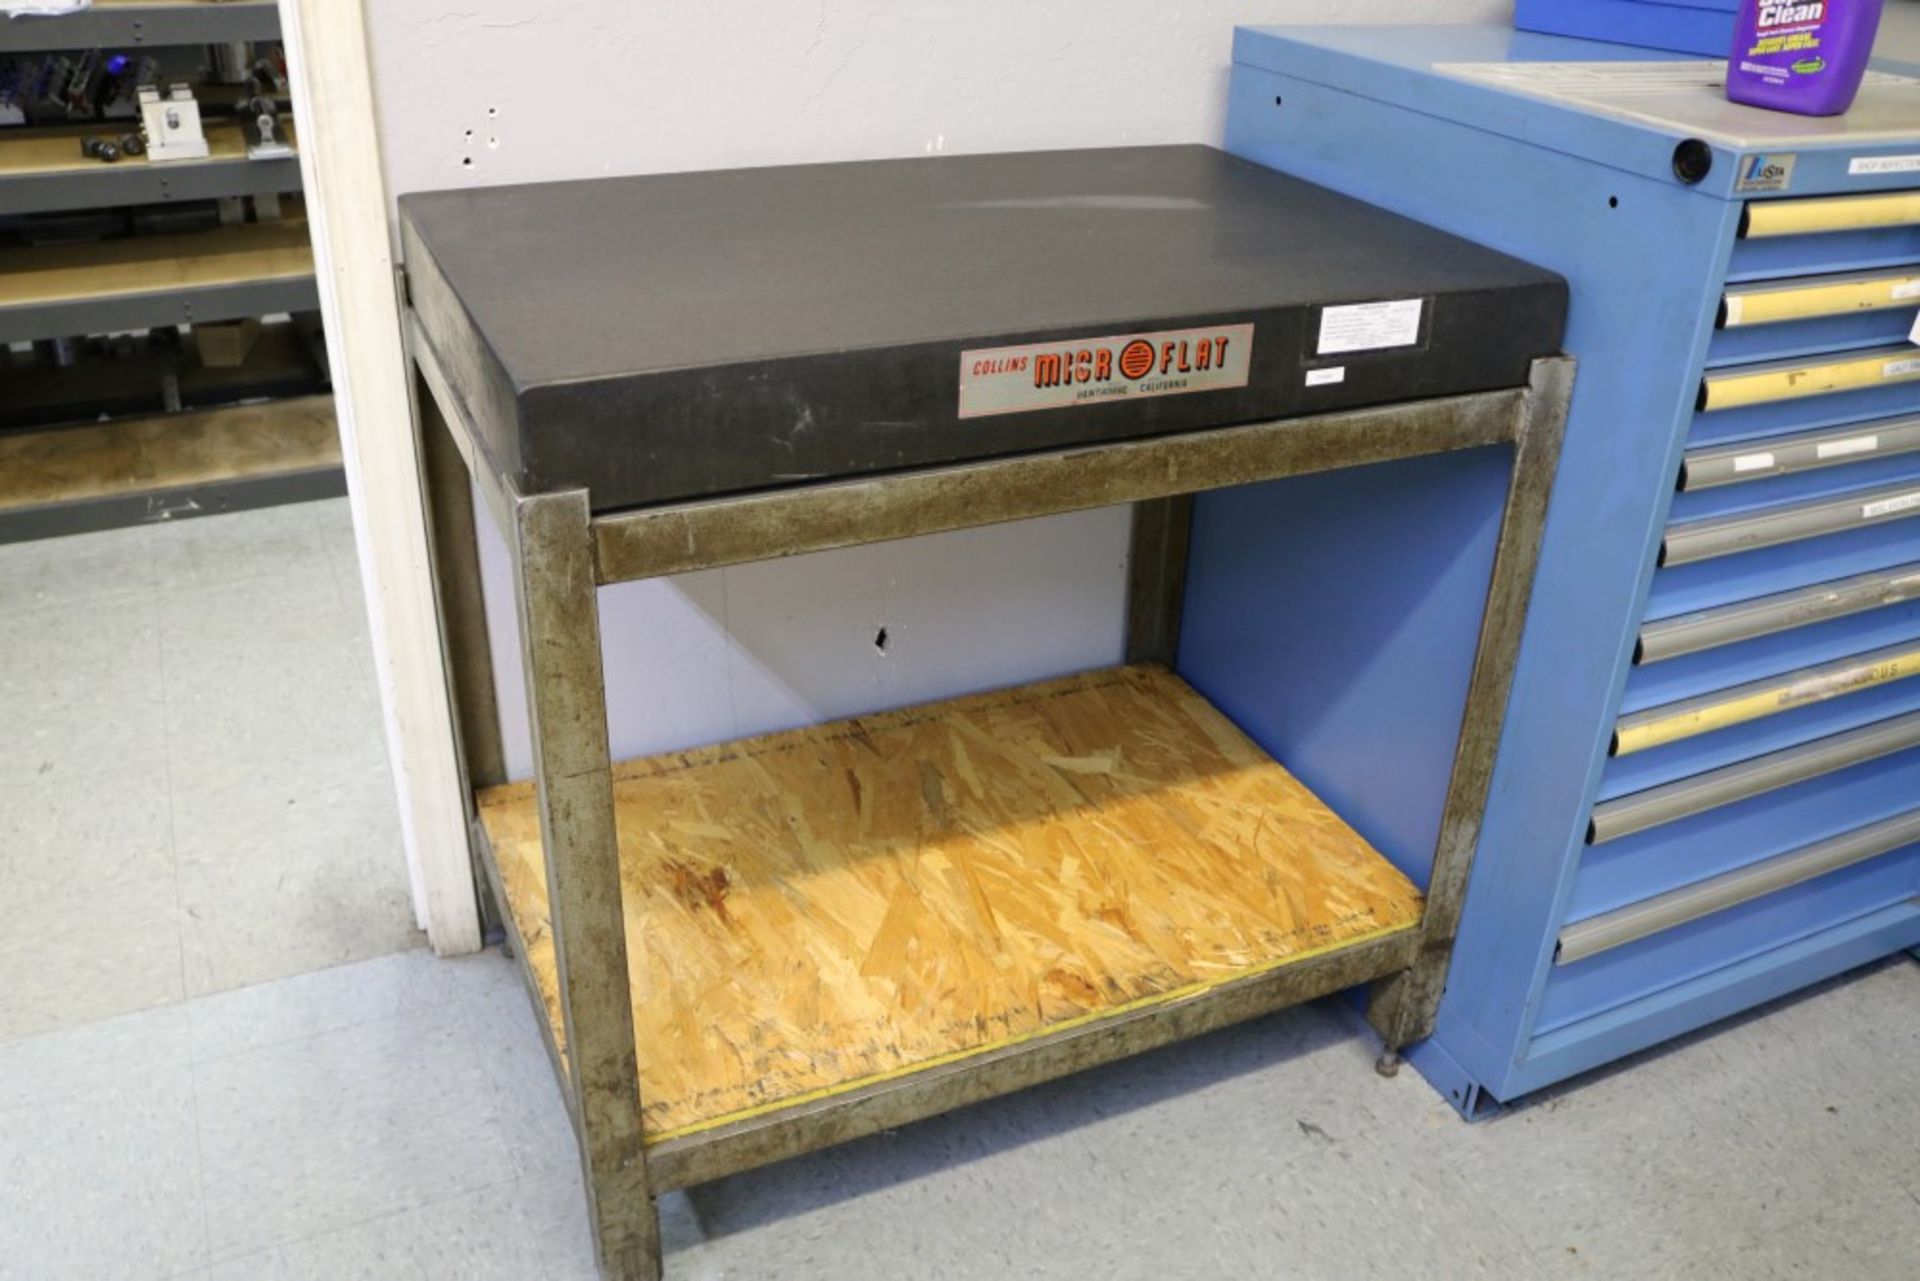 Collins Micro Flat Granite Inspection Table on Stand 24"x36" Grade B - Image 9 of 13